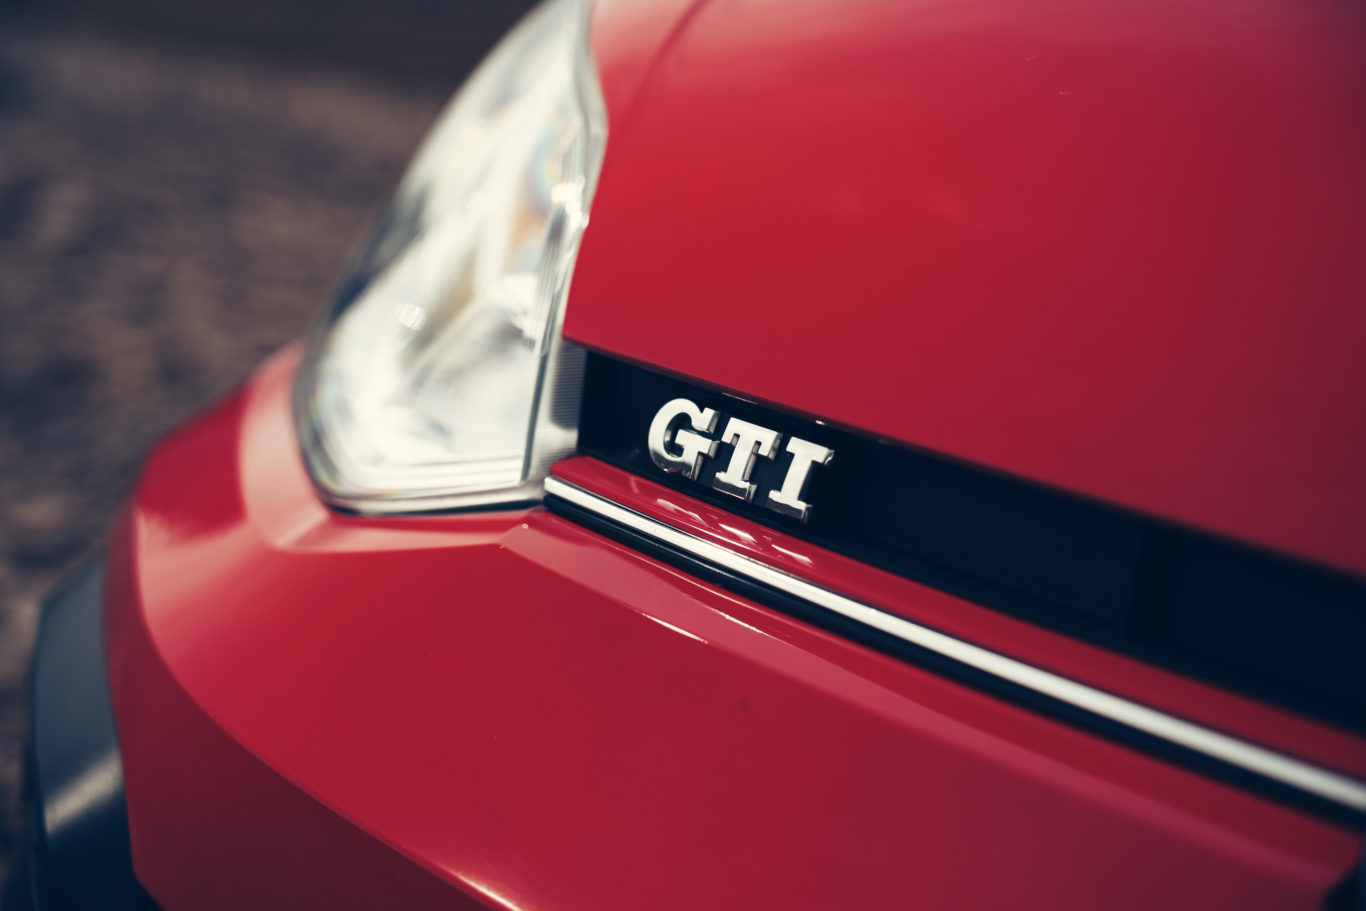 The Up! is the latest car to get the GTI badge